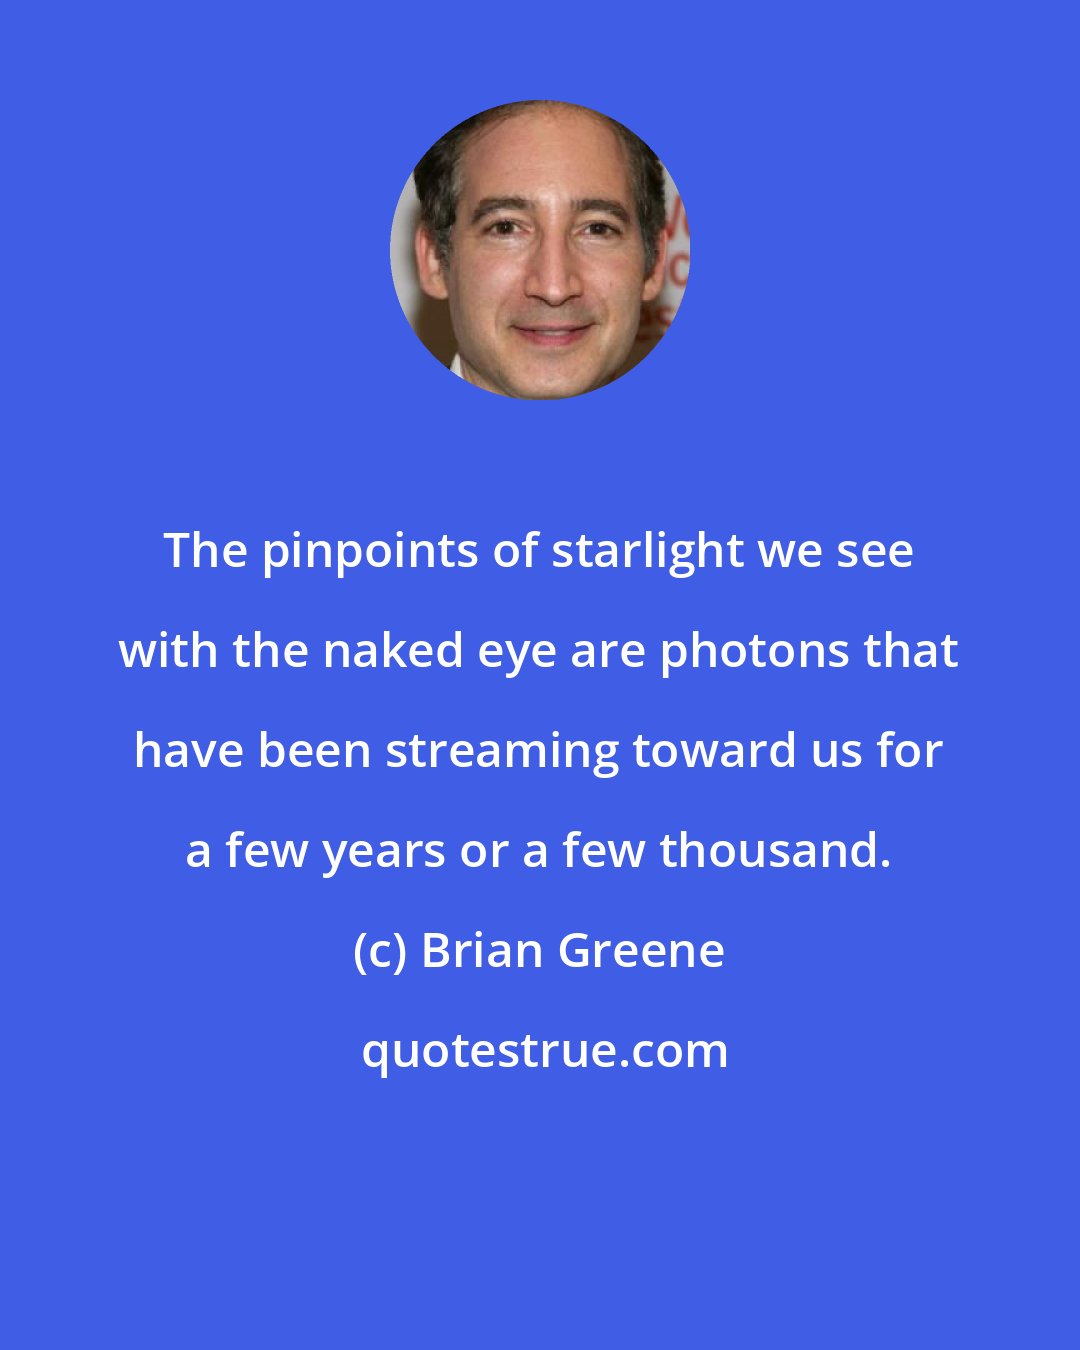 Brian Greene: The pinpoints of starlight we see with the naked eye are photons that have been streaming toward us for a few years or a few thousand.